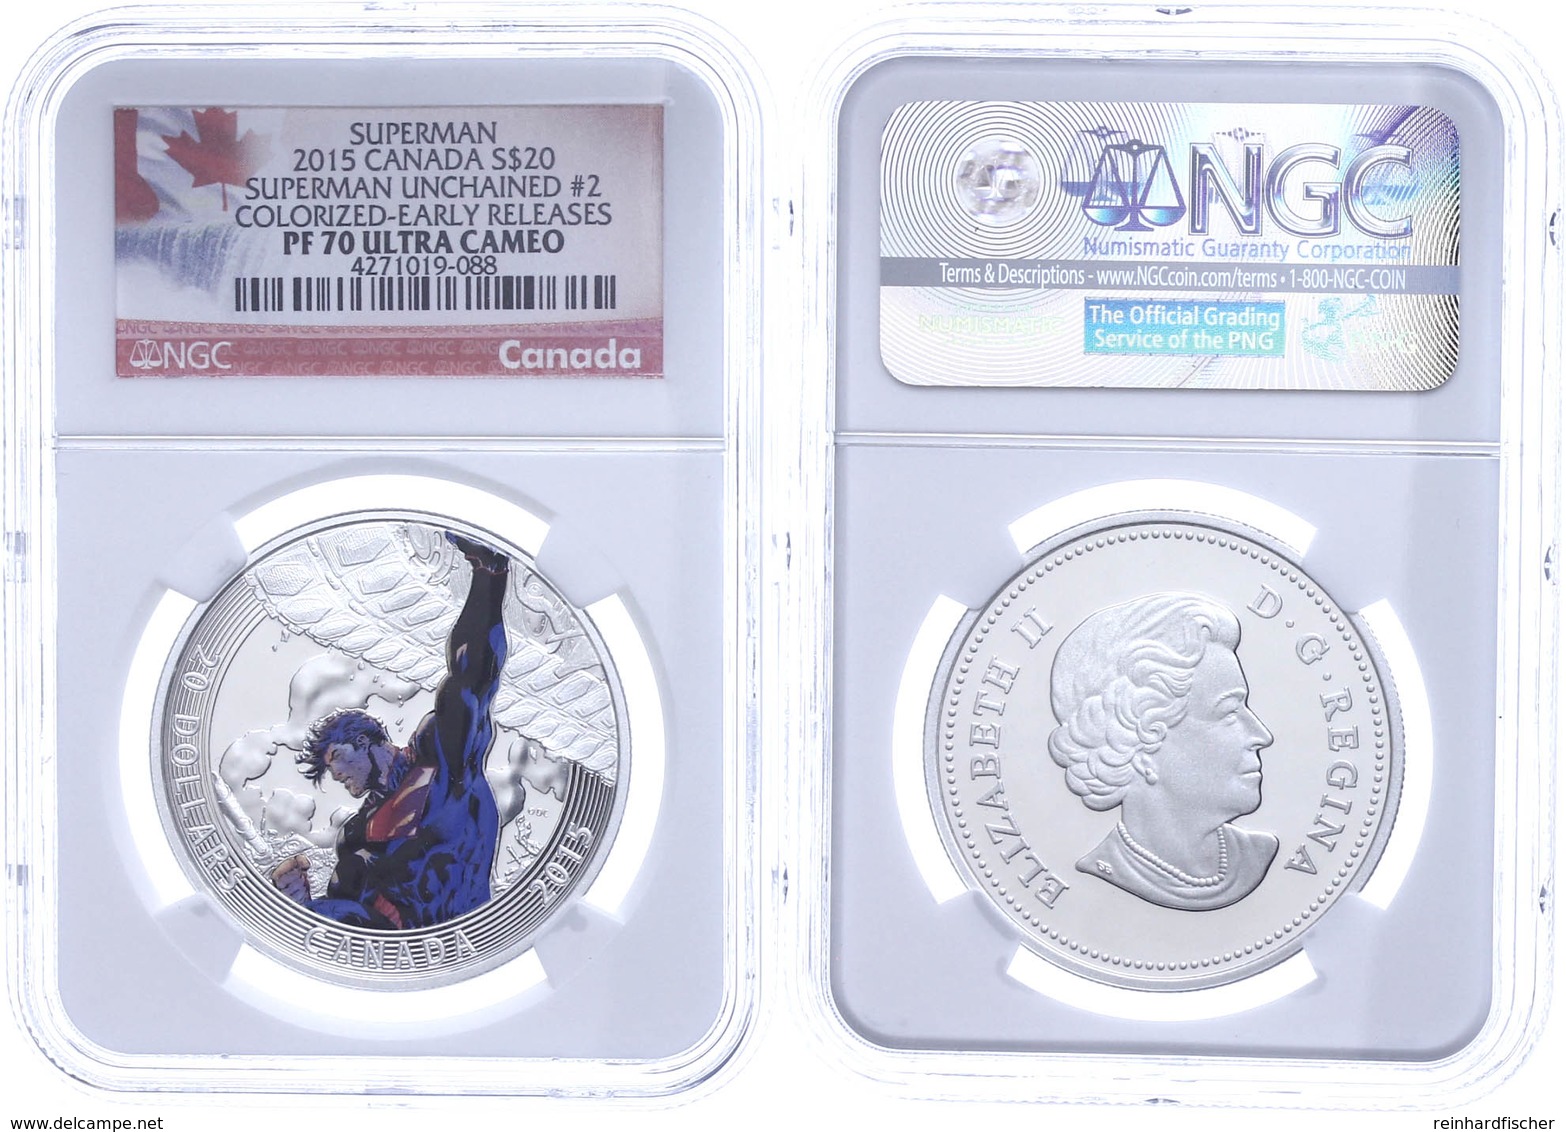 20 Dollars, 2015, Superman-Superman Unchained #2, In Slab Der NGC Mit Der Bewertung PF 70 Ultra Cameo, Colored Early Rel - Canada